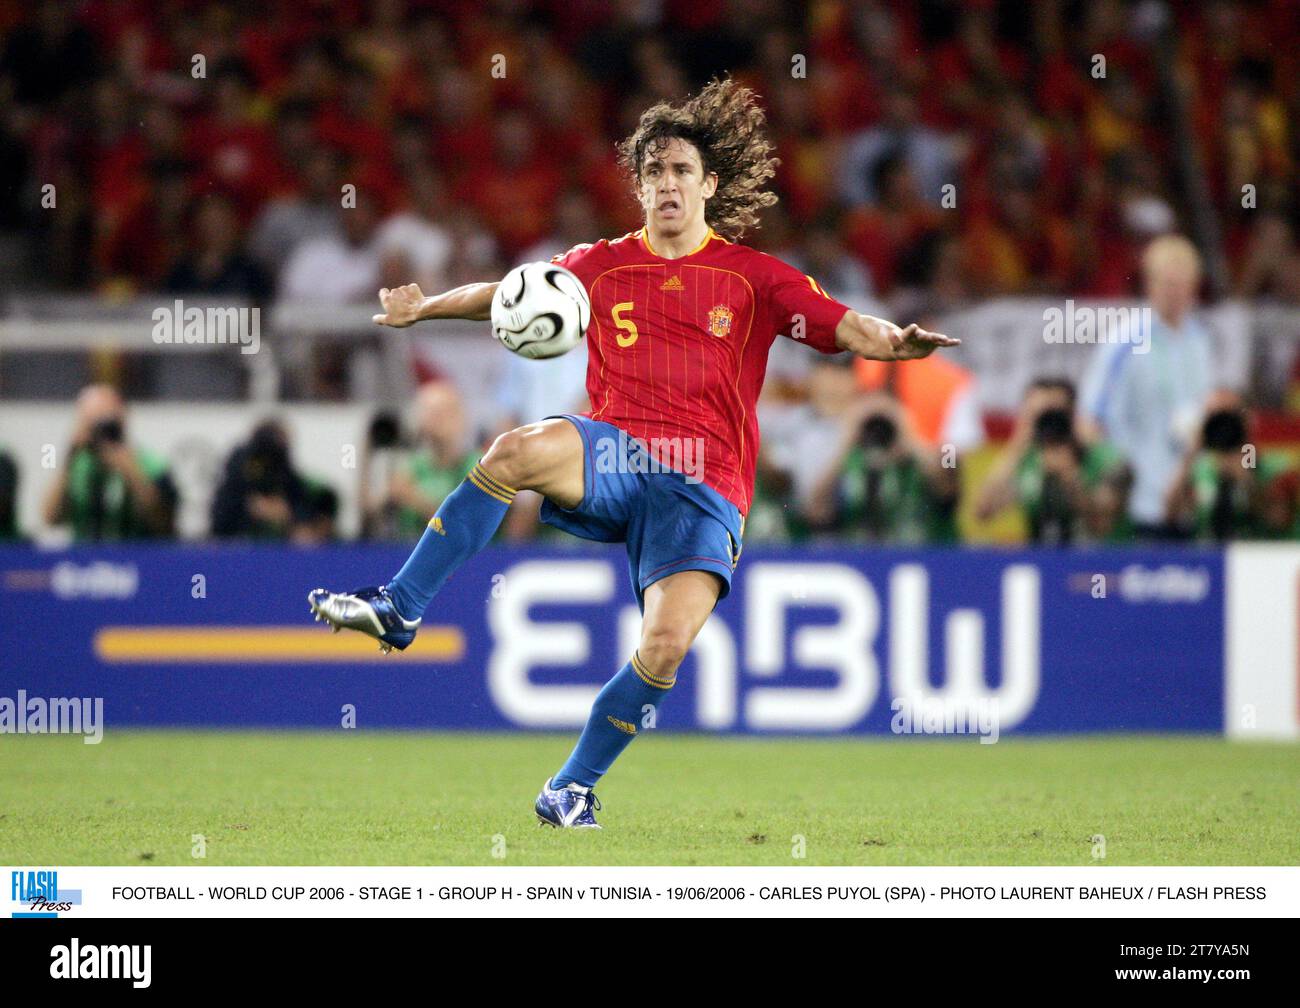 FOOTBALL - WORLD CUP 2006 - STAGE 1 - GROUP H - SPAIN v TUNISIA - 19/06/2006 - CARLES PUYOL (SPA) - PHOTO LAURENT BAHEUX / FLASH PRESS Stock Photo